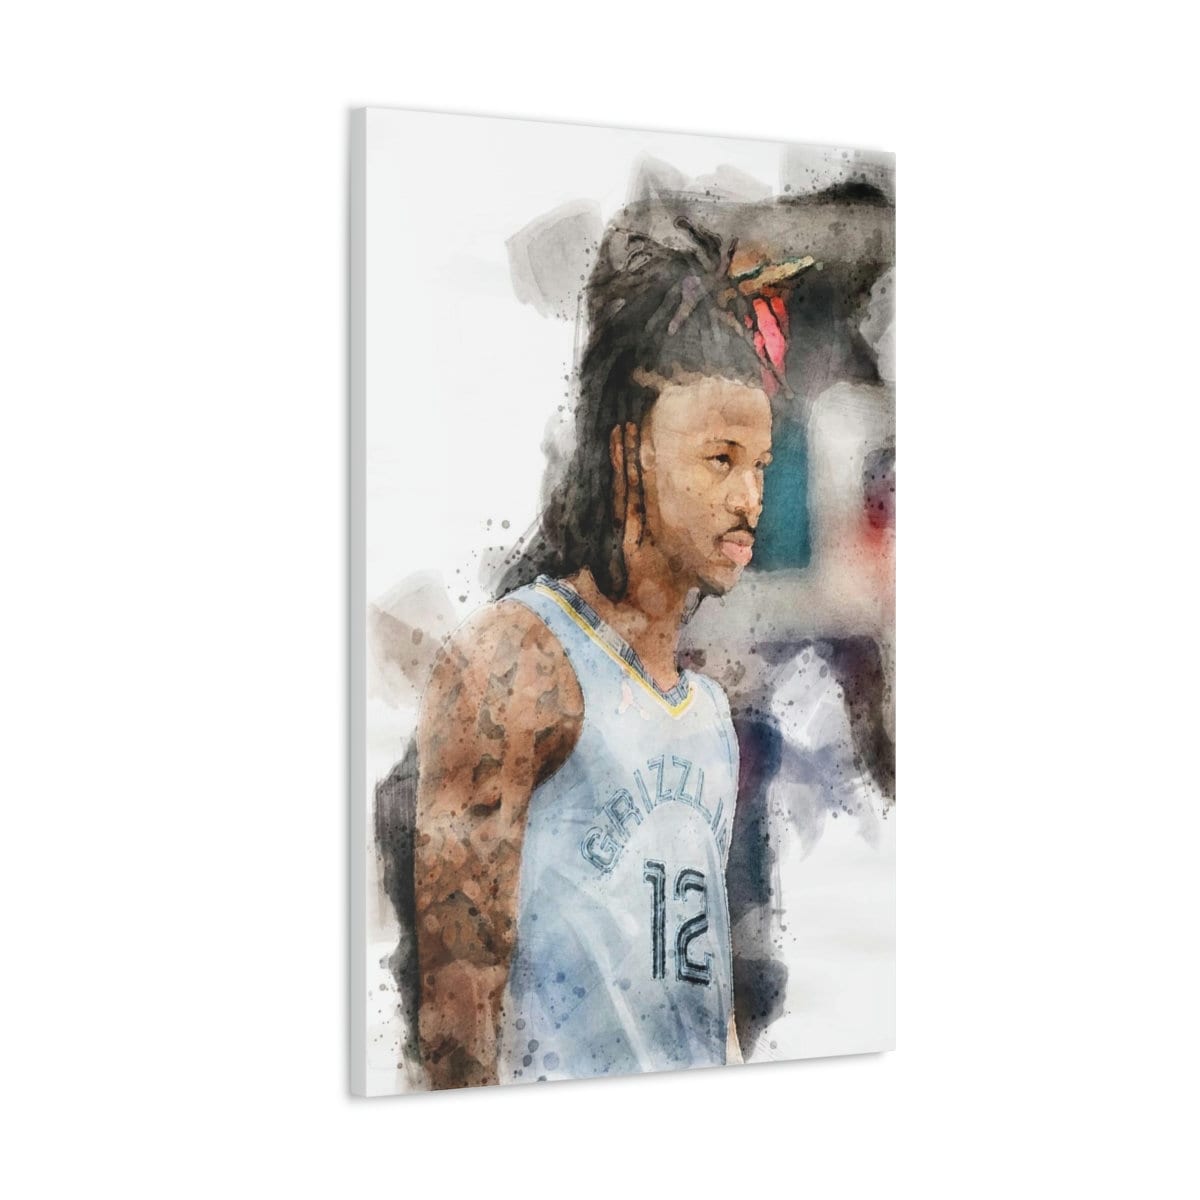 Ja Morant Poster, Canvas Wrap, Kids Room, Man Cave, Woman Cave, Game Room